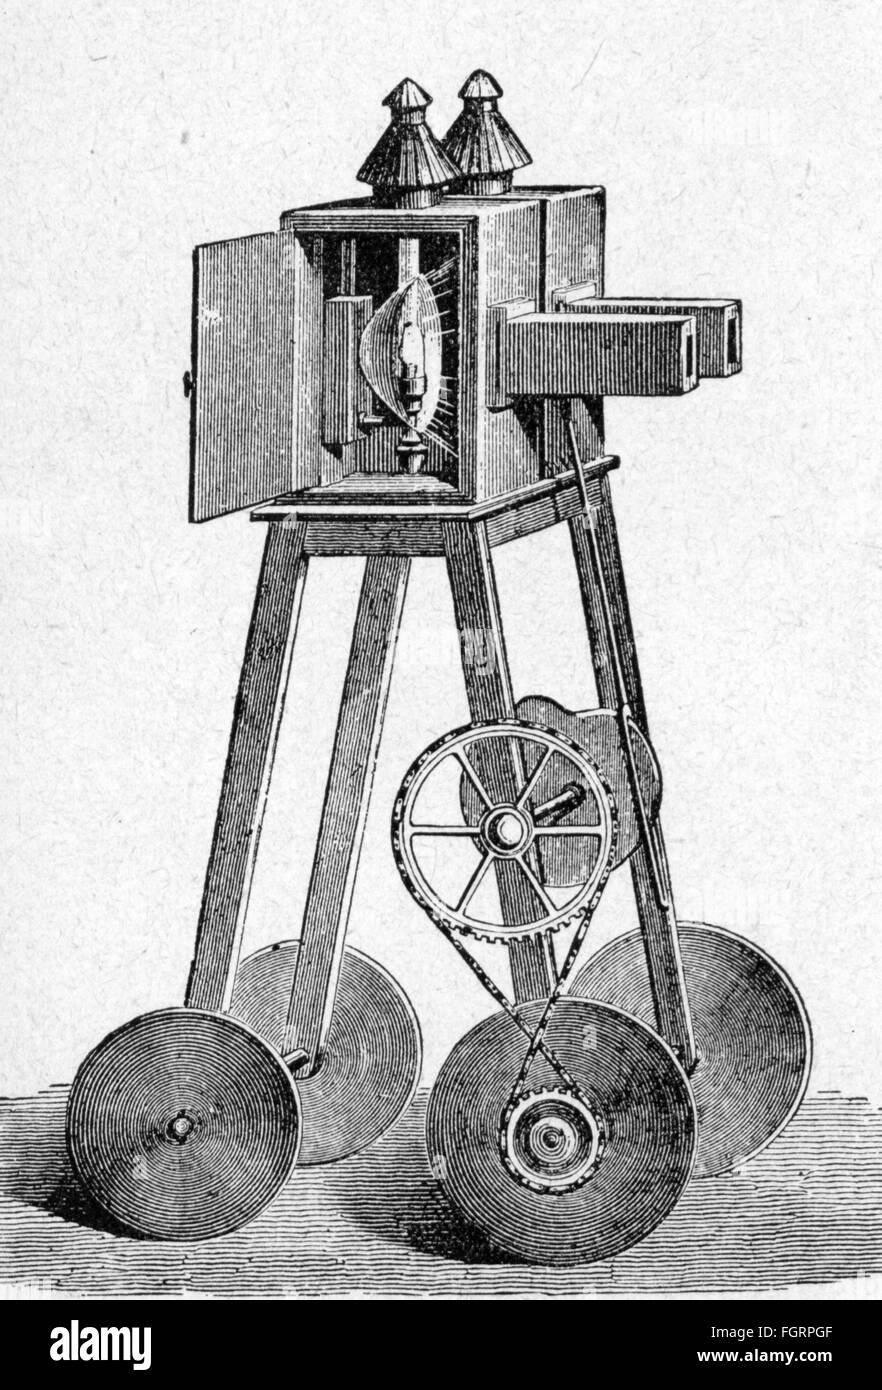 movie / cinema, Laterna magica, magic lantern for fog images, wood engraving, 19th century, 19th century, graphic, graphics, object, objects, stills, projector, projectors, project, projecting, lamp, lamps, box, boxes, Camera obscura, historic, historical, Additional-Rights-Clearences-Not Available Stock Photo